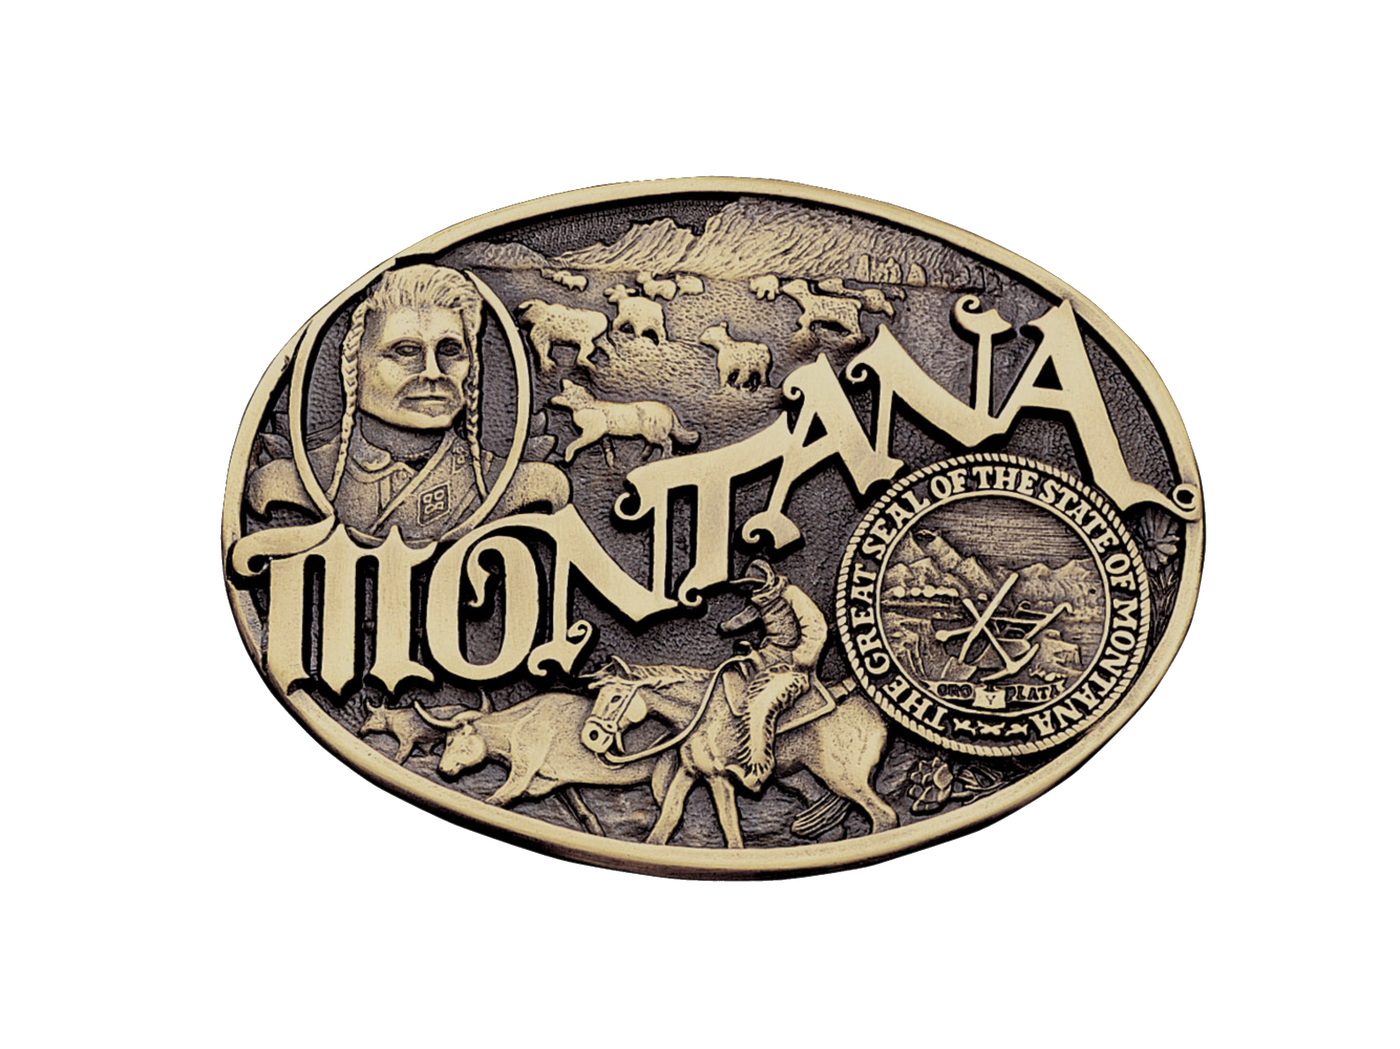 Antiqued brass colored Attitude buckle Montana state and symbols. Standard 1.5 belt swivel.